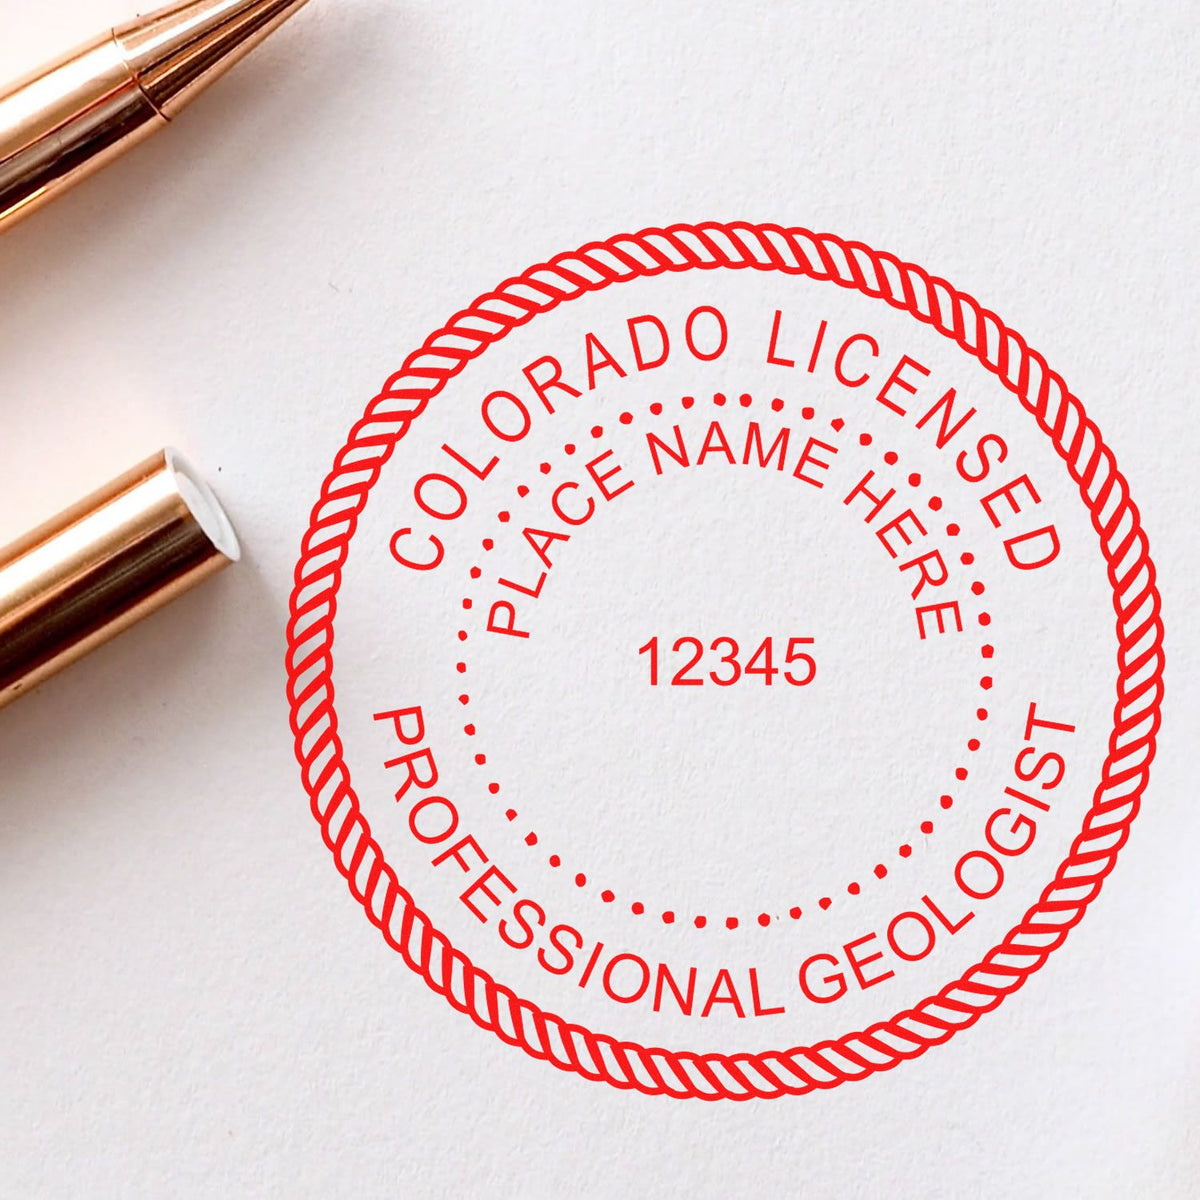 The Premium MaxLight Pre-Inked Colorado Geology Stamp stamp impression comes to life with a crisp, detailed image stamped on paper - showcasing true professional quality.